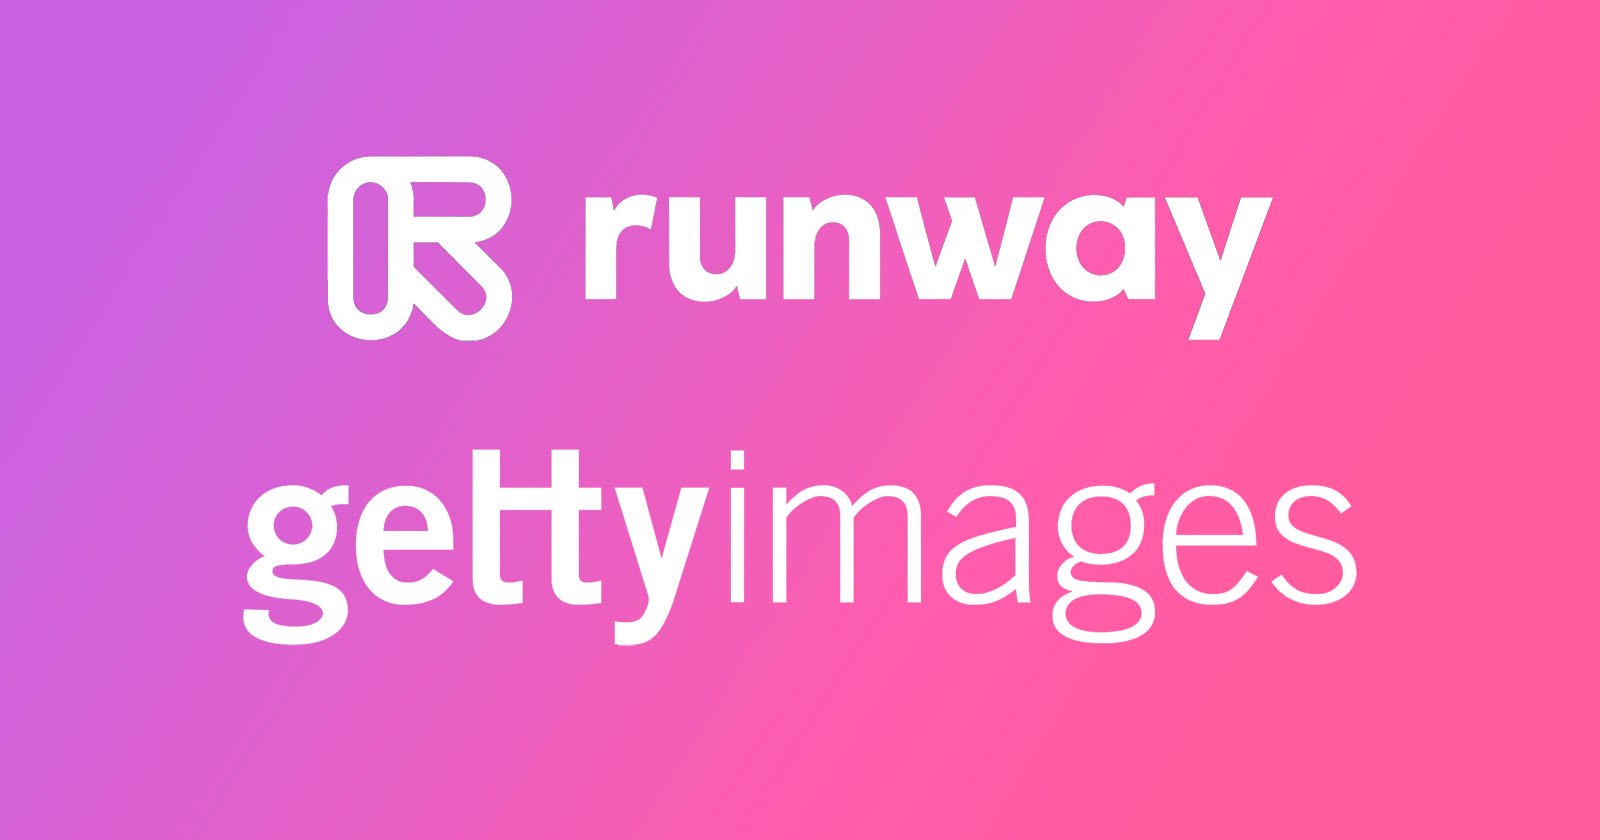  startup runway partners getty generate safe content 